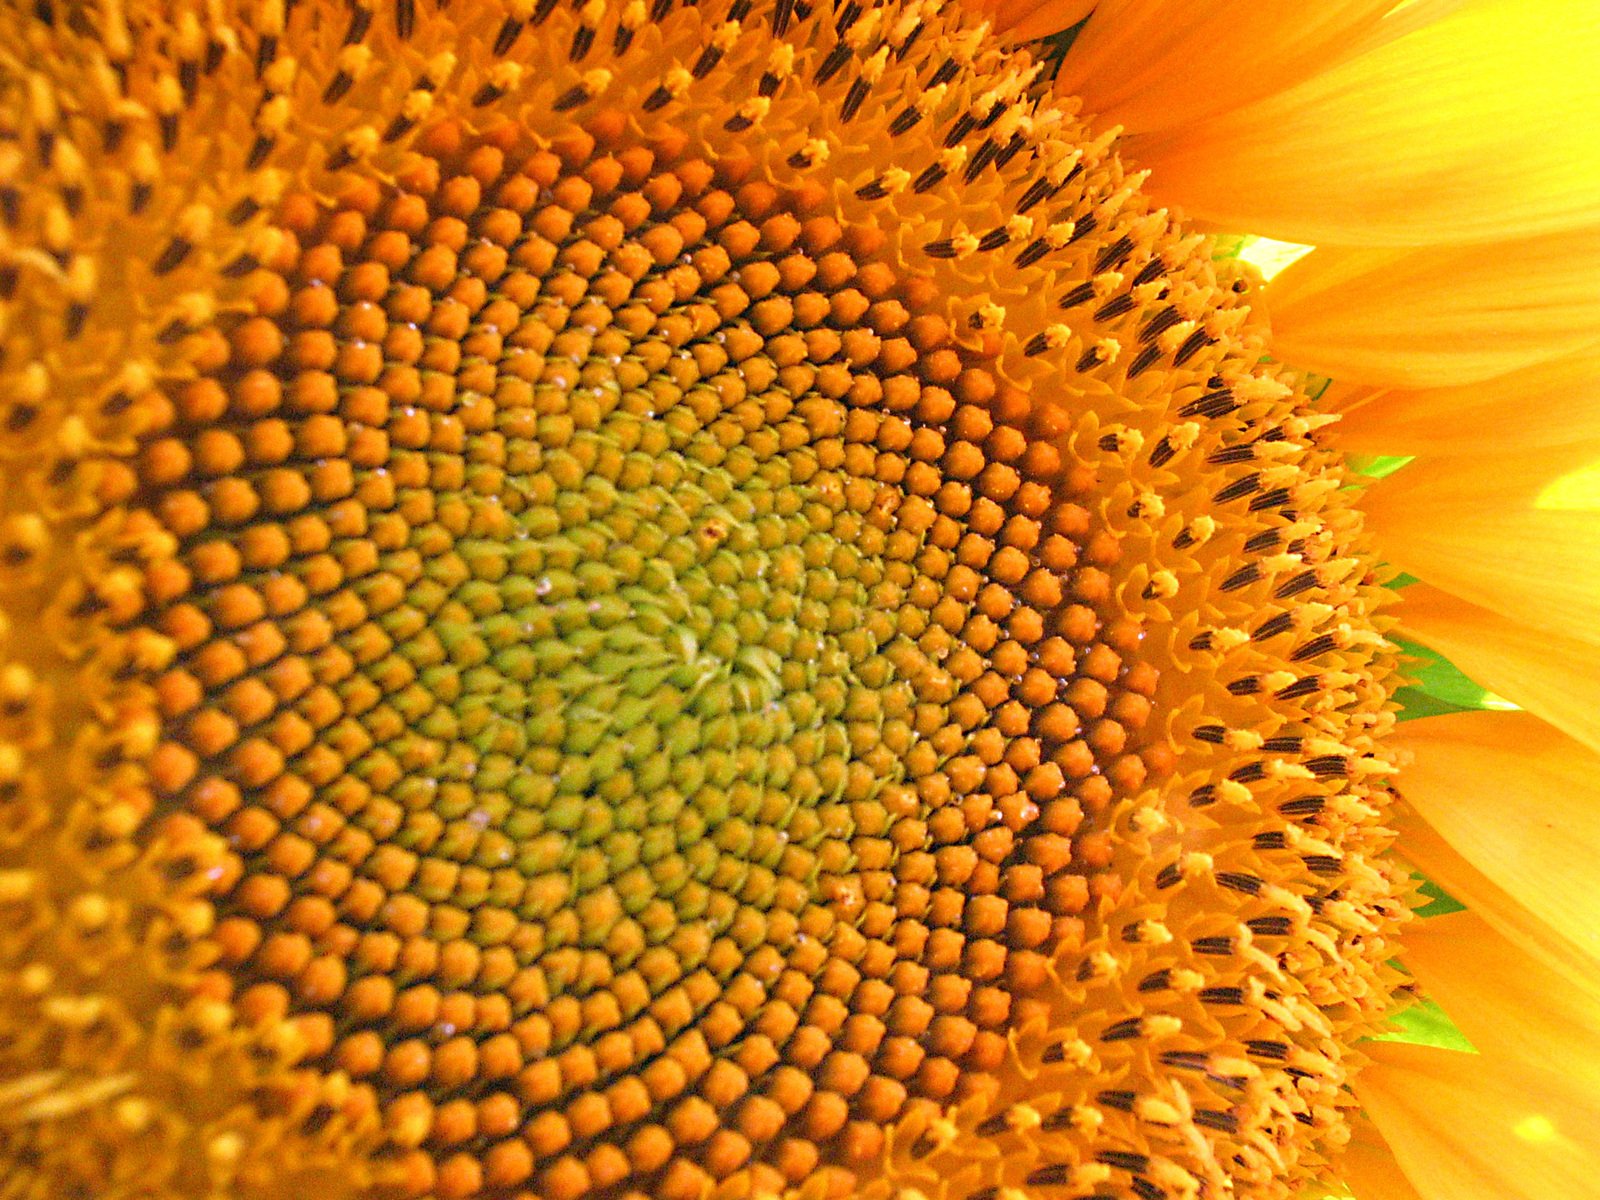 a sunflower is shown showing the center